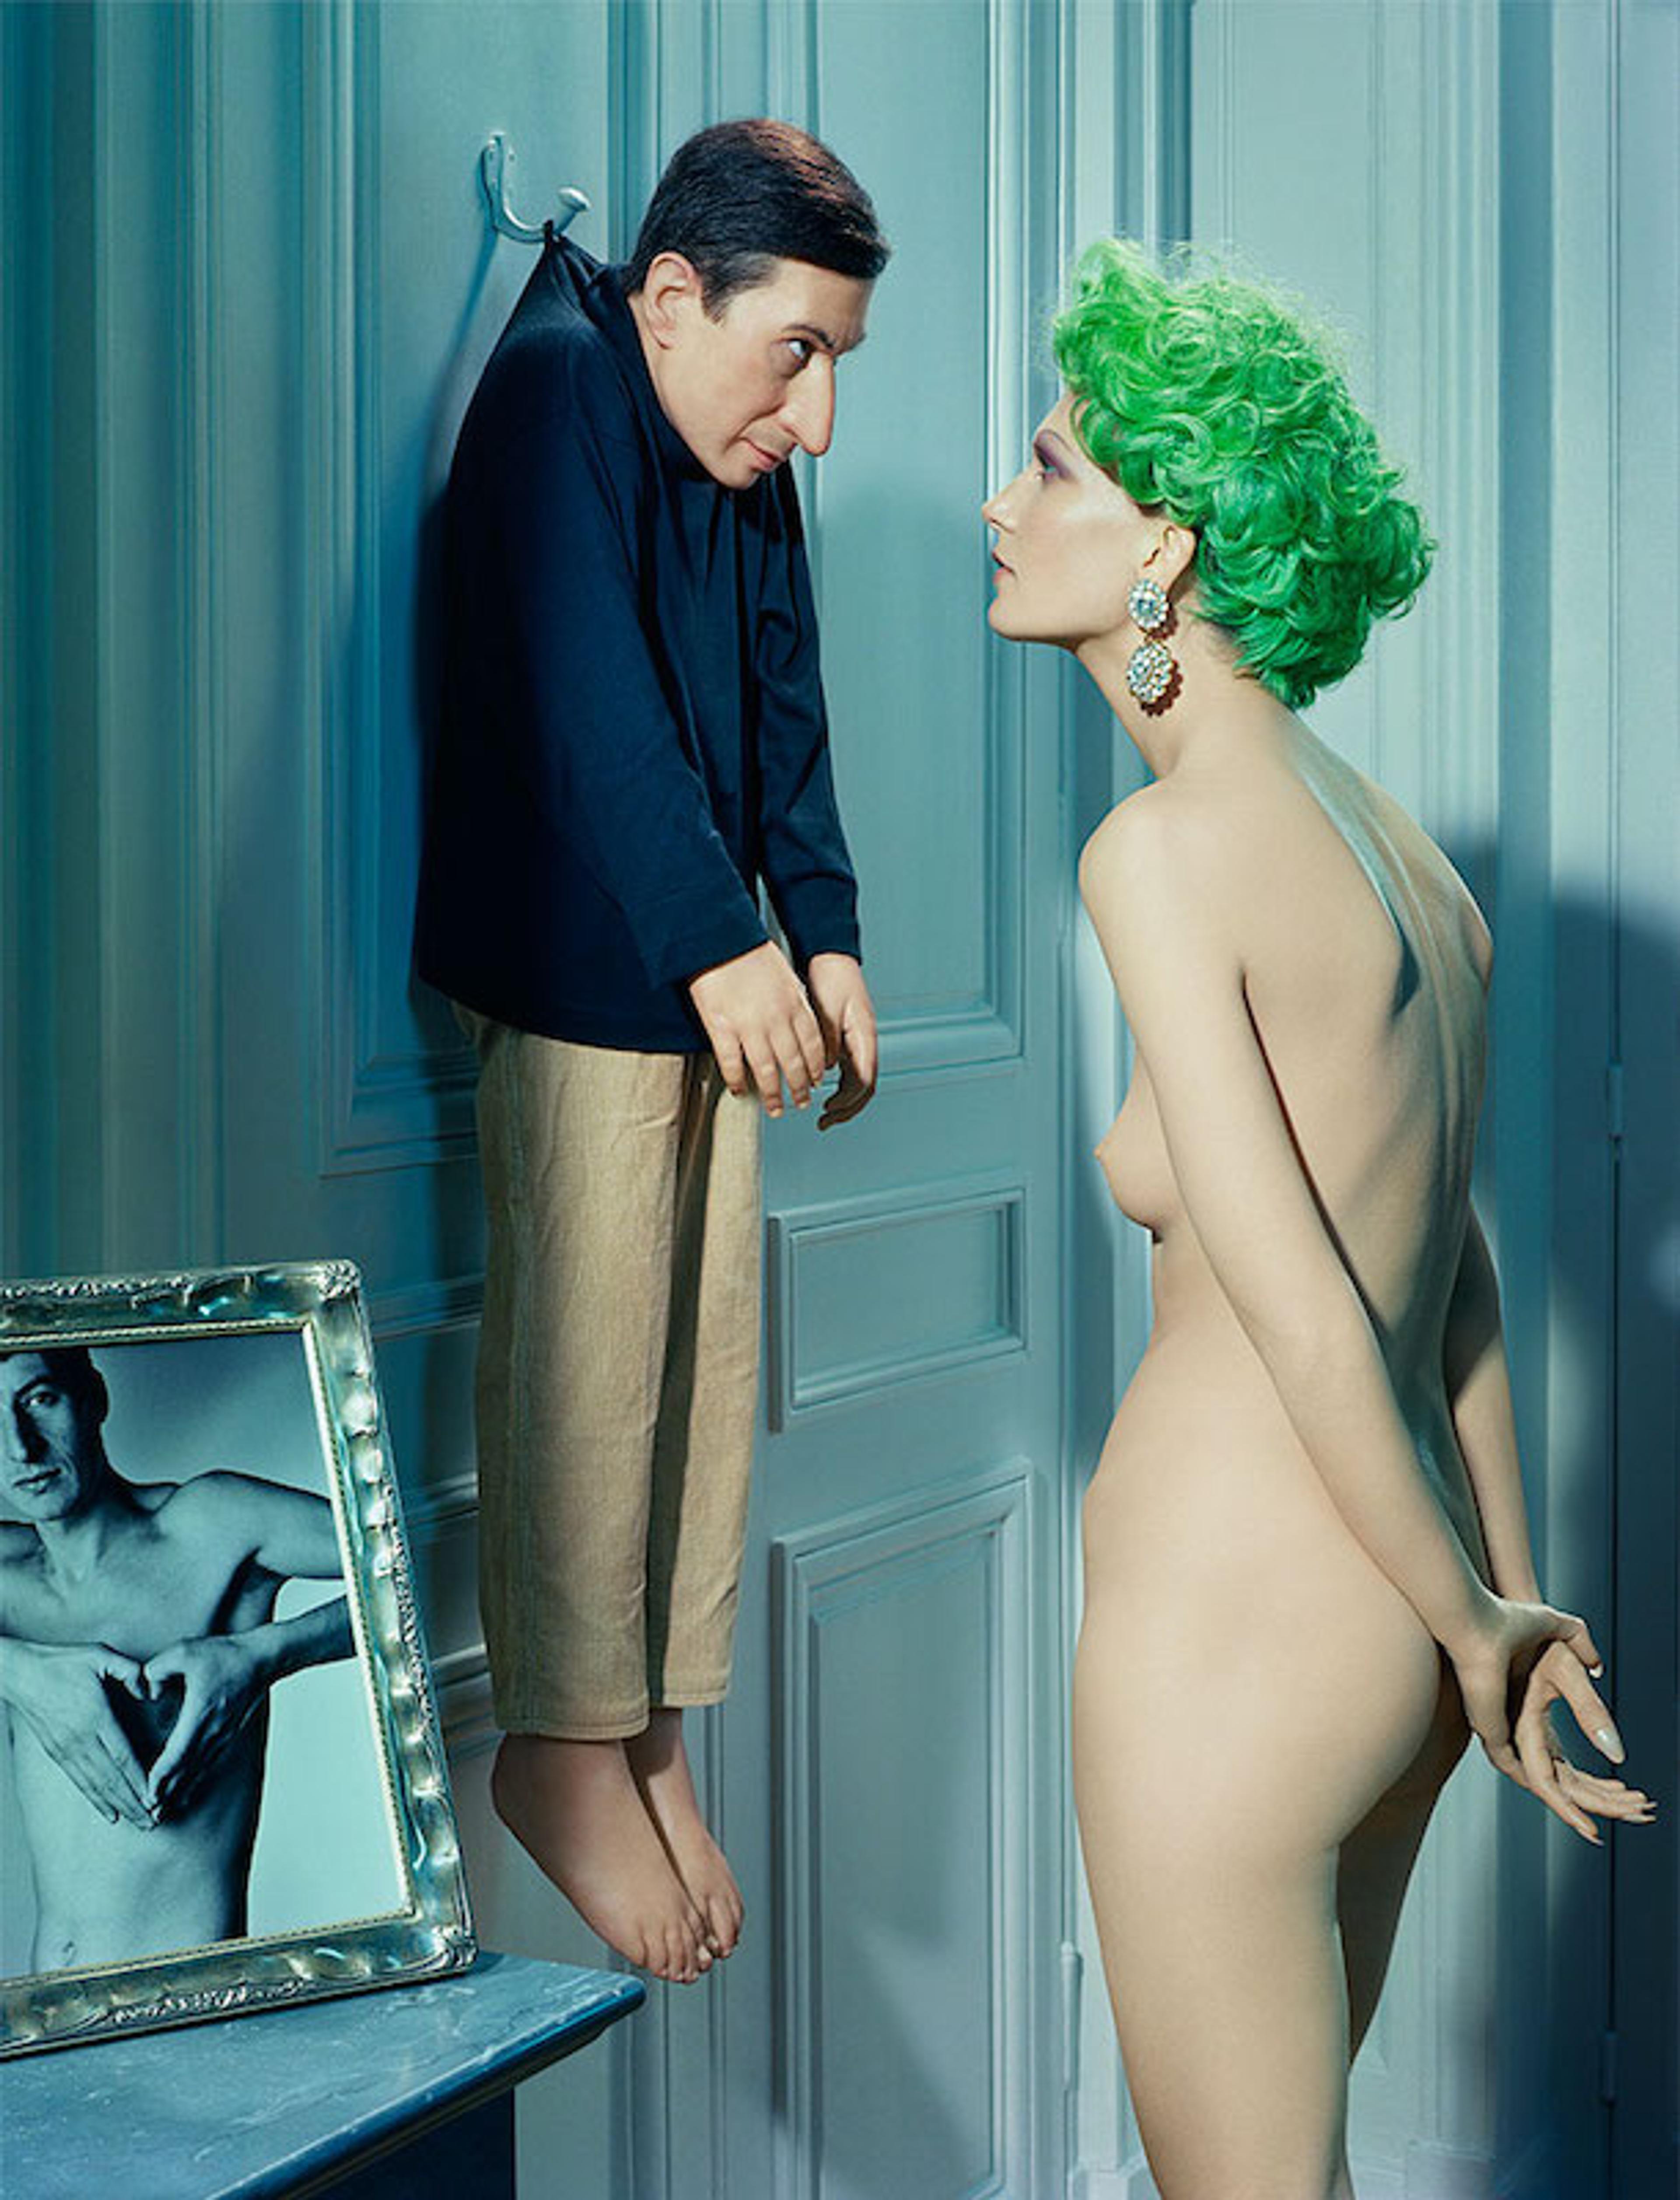 A photograph of a small man hanging on the back of a door by his coat and being stared at by a nude woman with short green hair